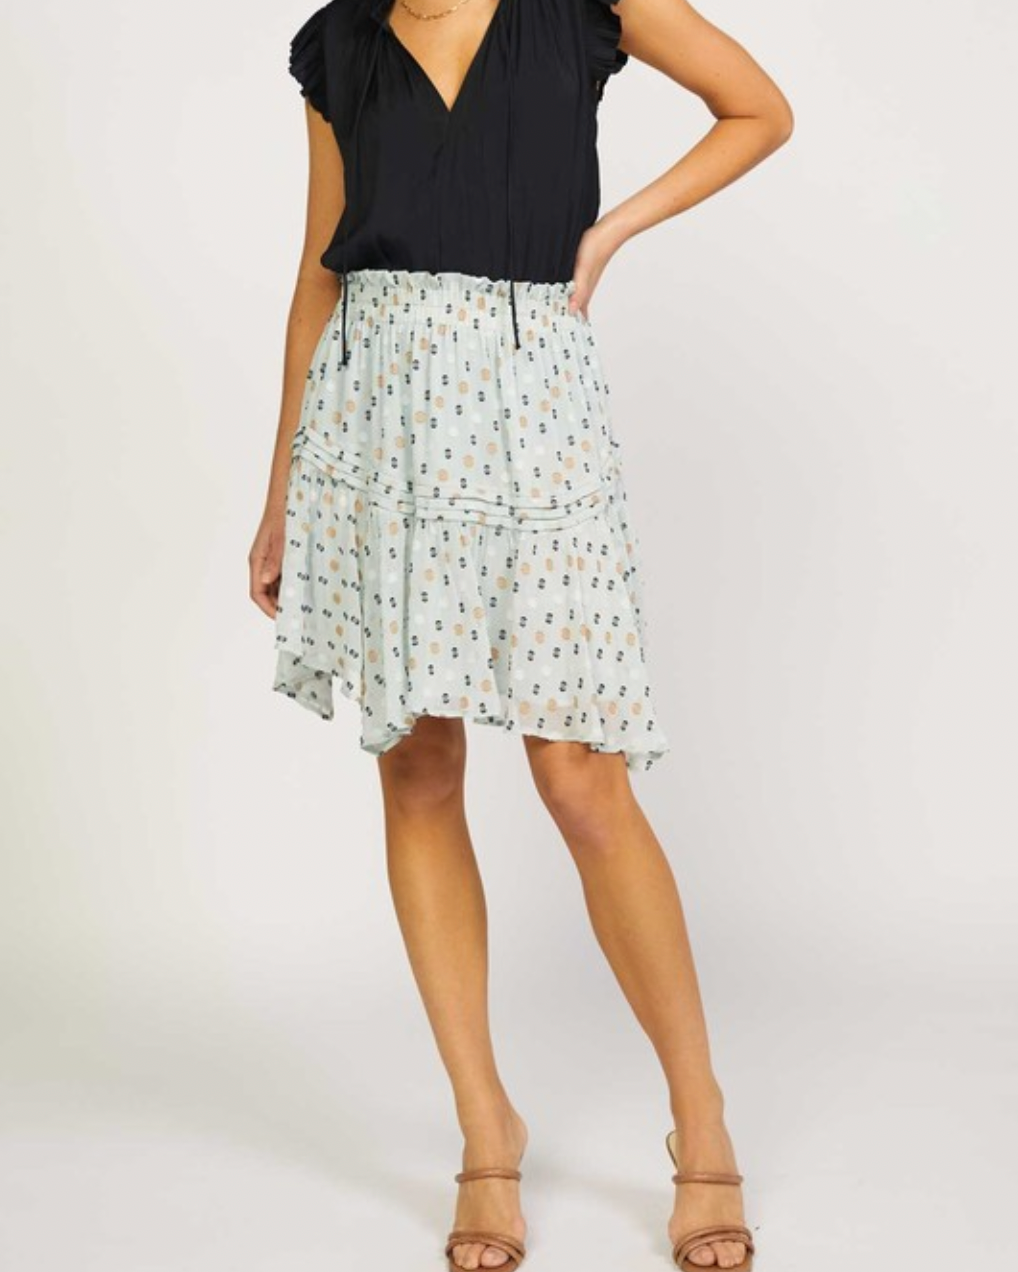 Model wearing Current Air Dusty Mint Dotted Mini Skirt wearing black tank top and brown sandals on a white background